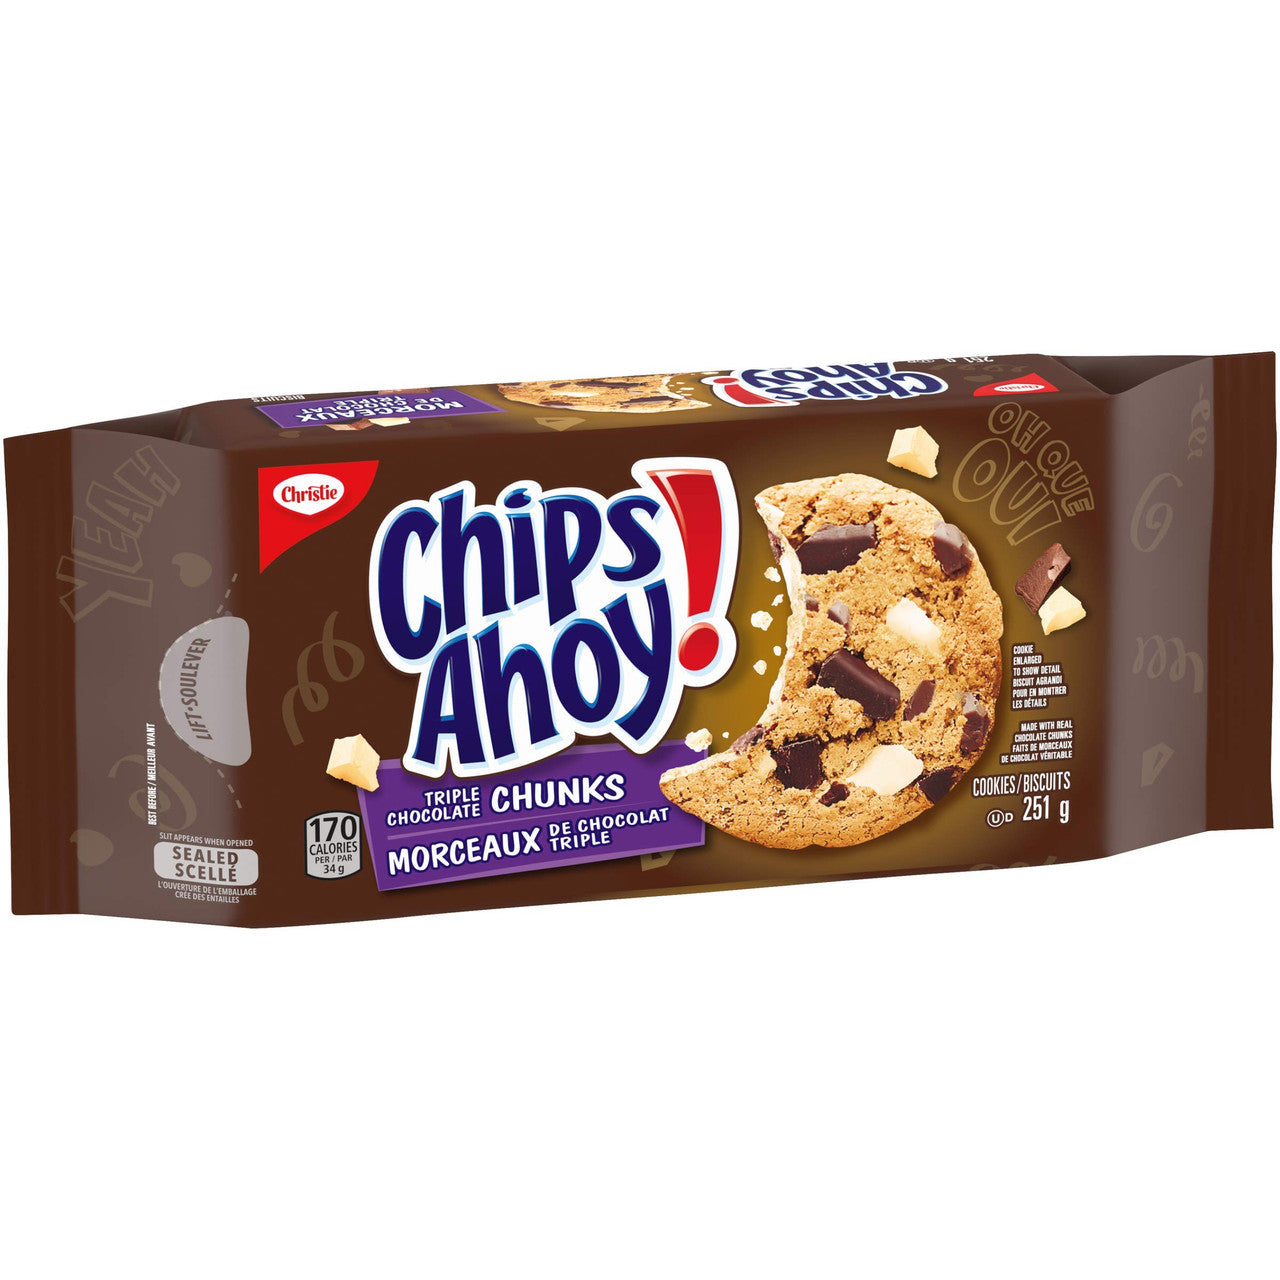 Christie Chips Ahoy Triple Chocolate Chunks Chocolate Chip Cookies, 251g/8.9oz {Imported from Canada}